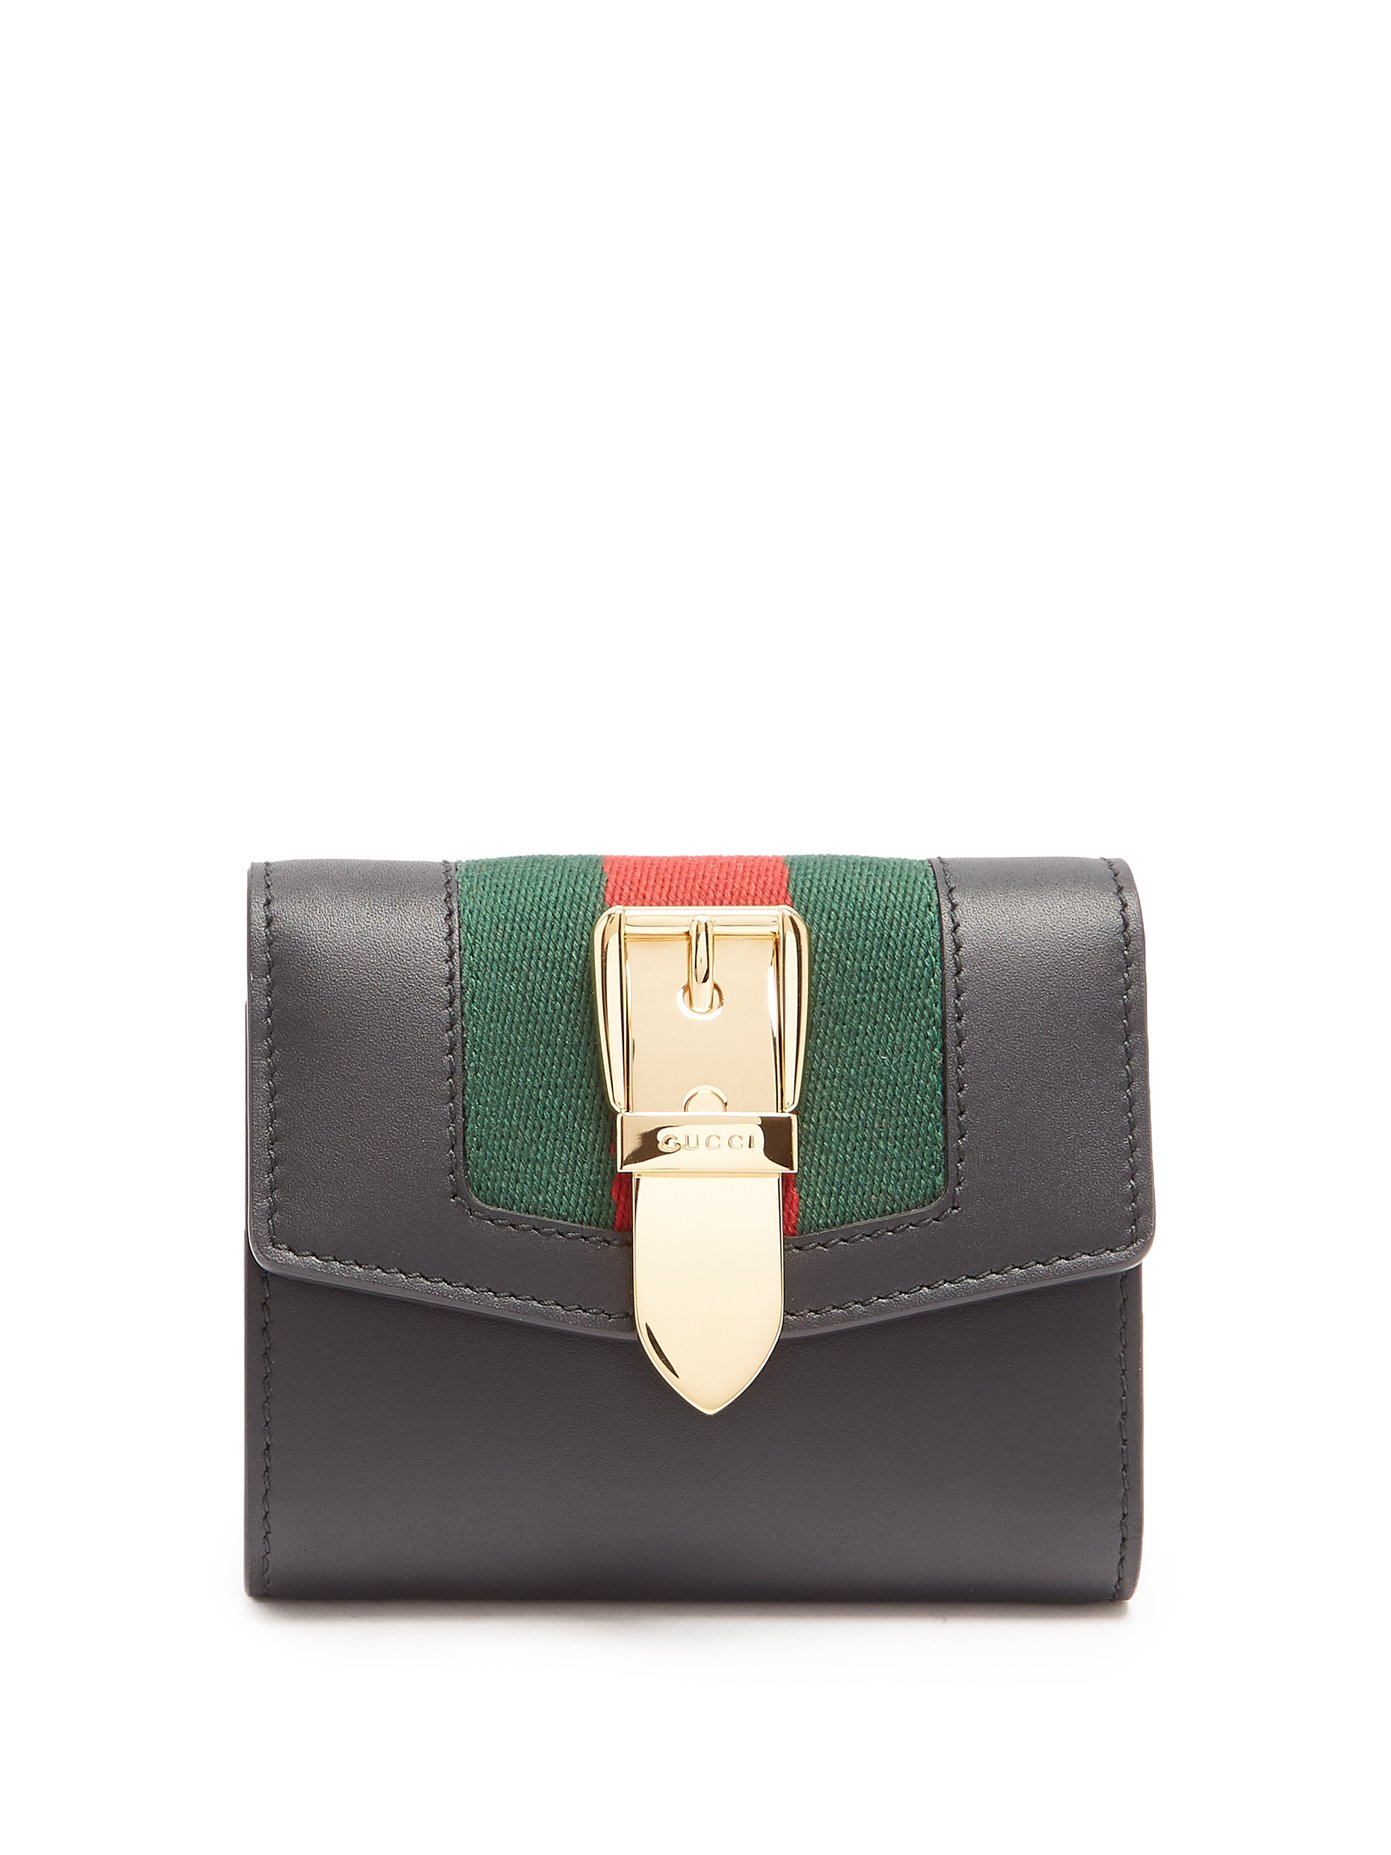 Sylvie leather wallet | Gucci 